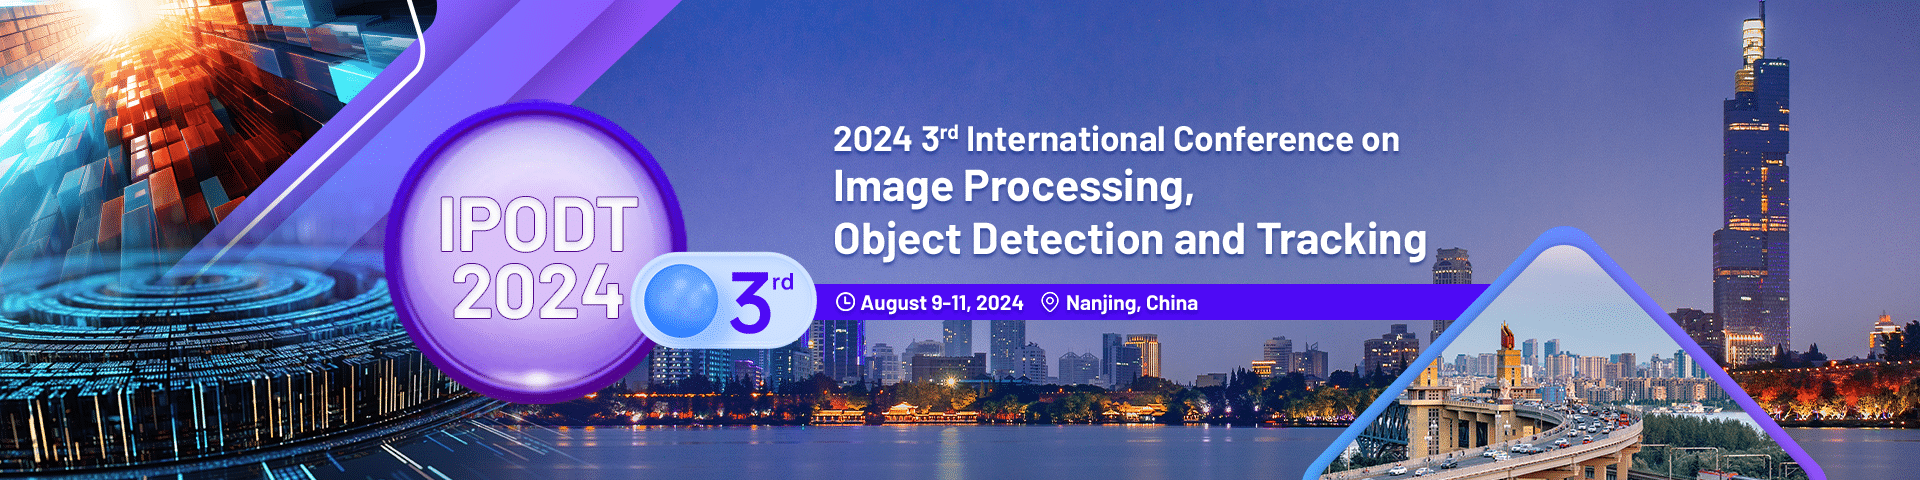 2024 3rd International Conference on Image Processing, Object Detection and Tracking (IPODT 2024)